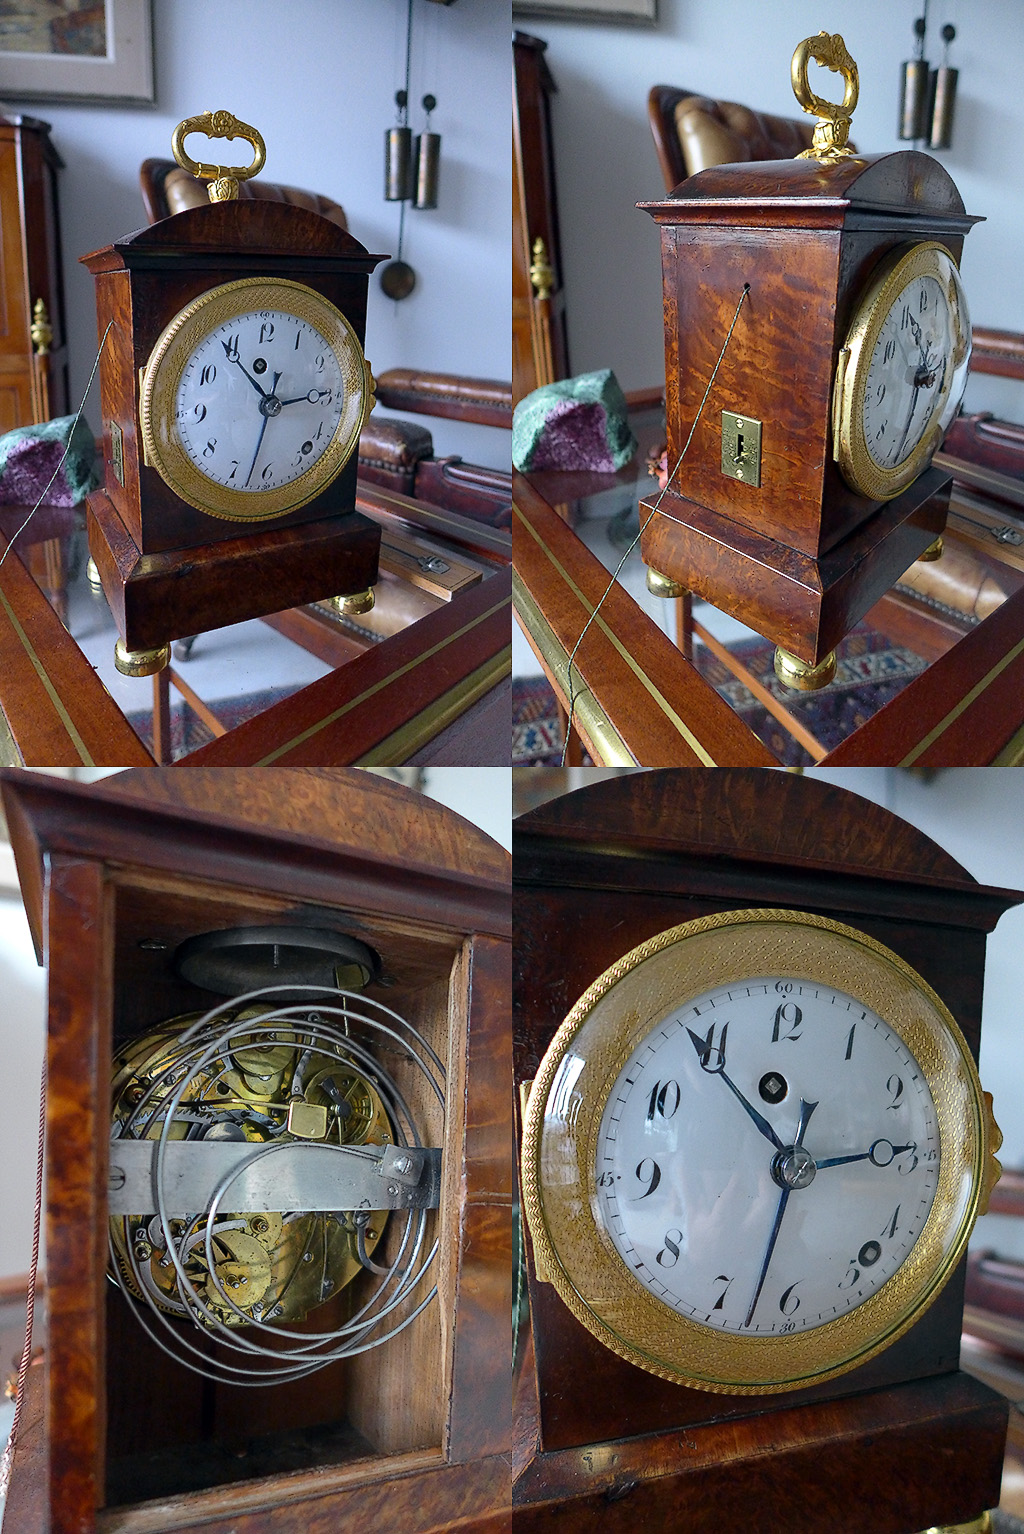 Yet another carriage clock, this time with a quarter repeater and an alarm function.